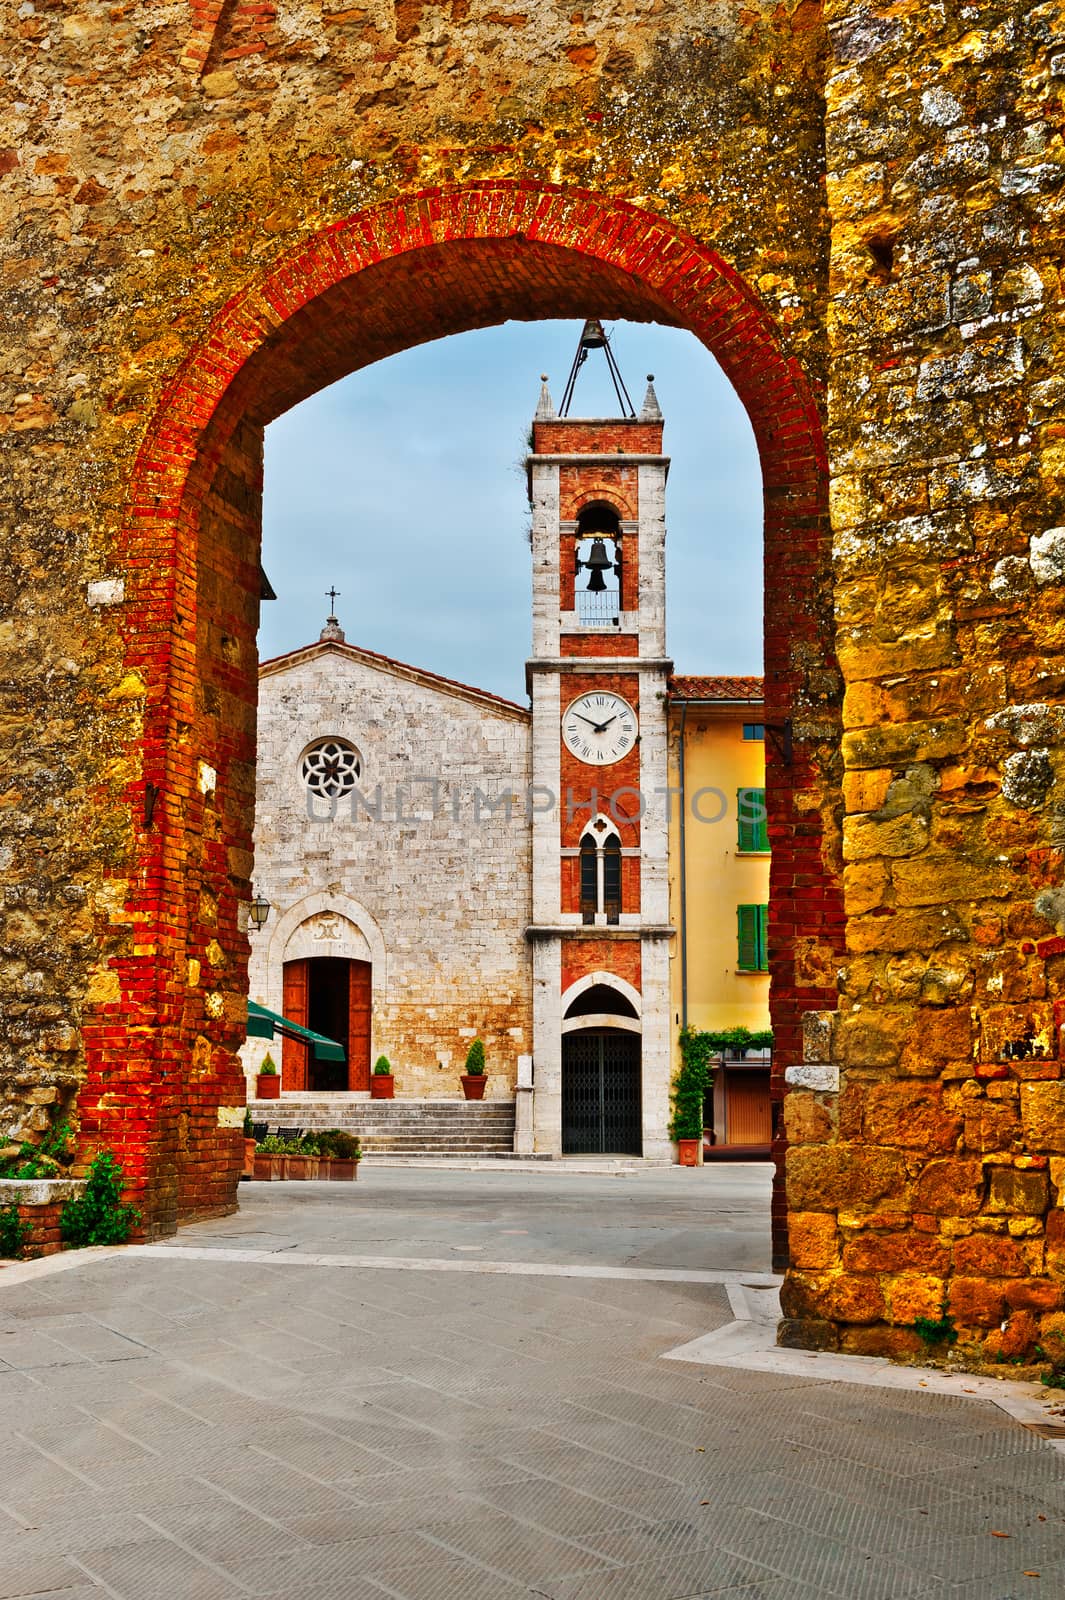 View through the Arch to the Church in the Italian City of Cetona